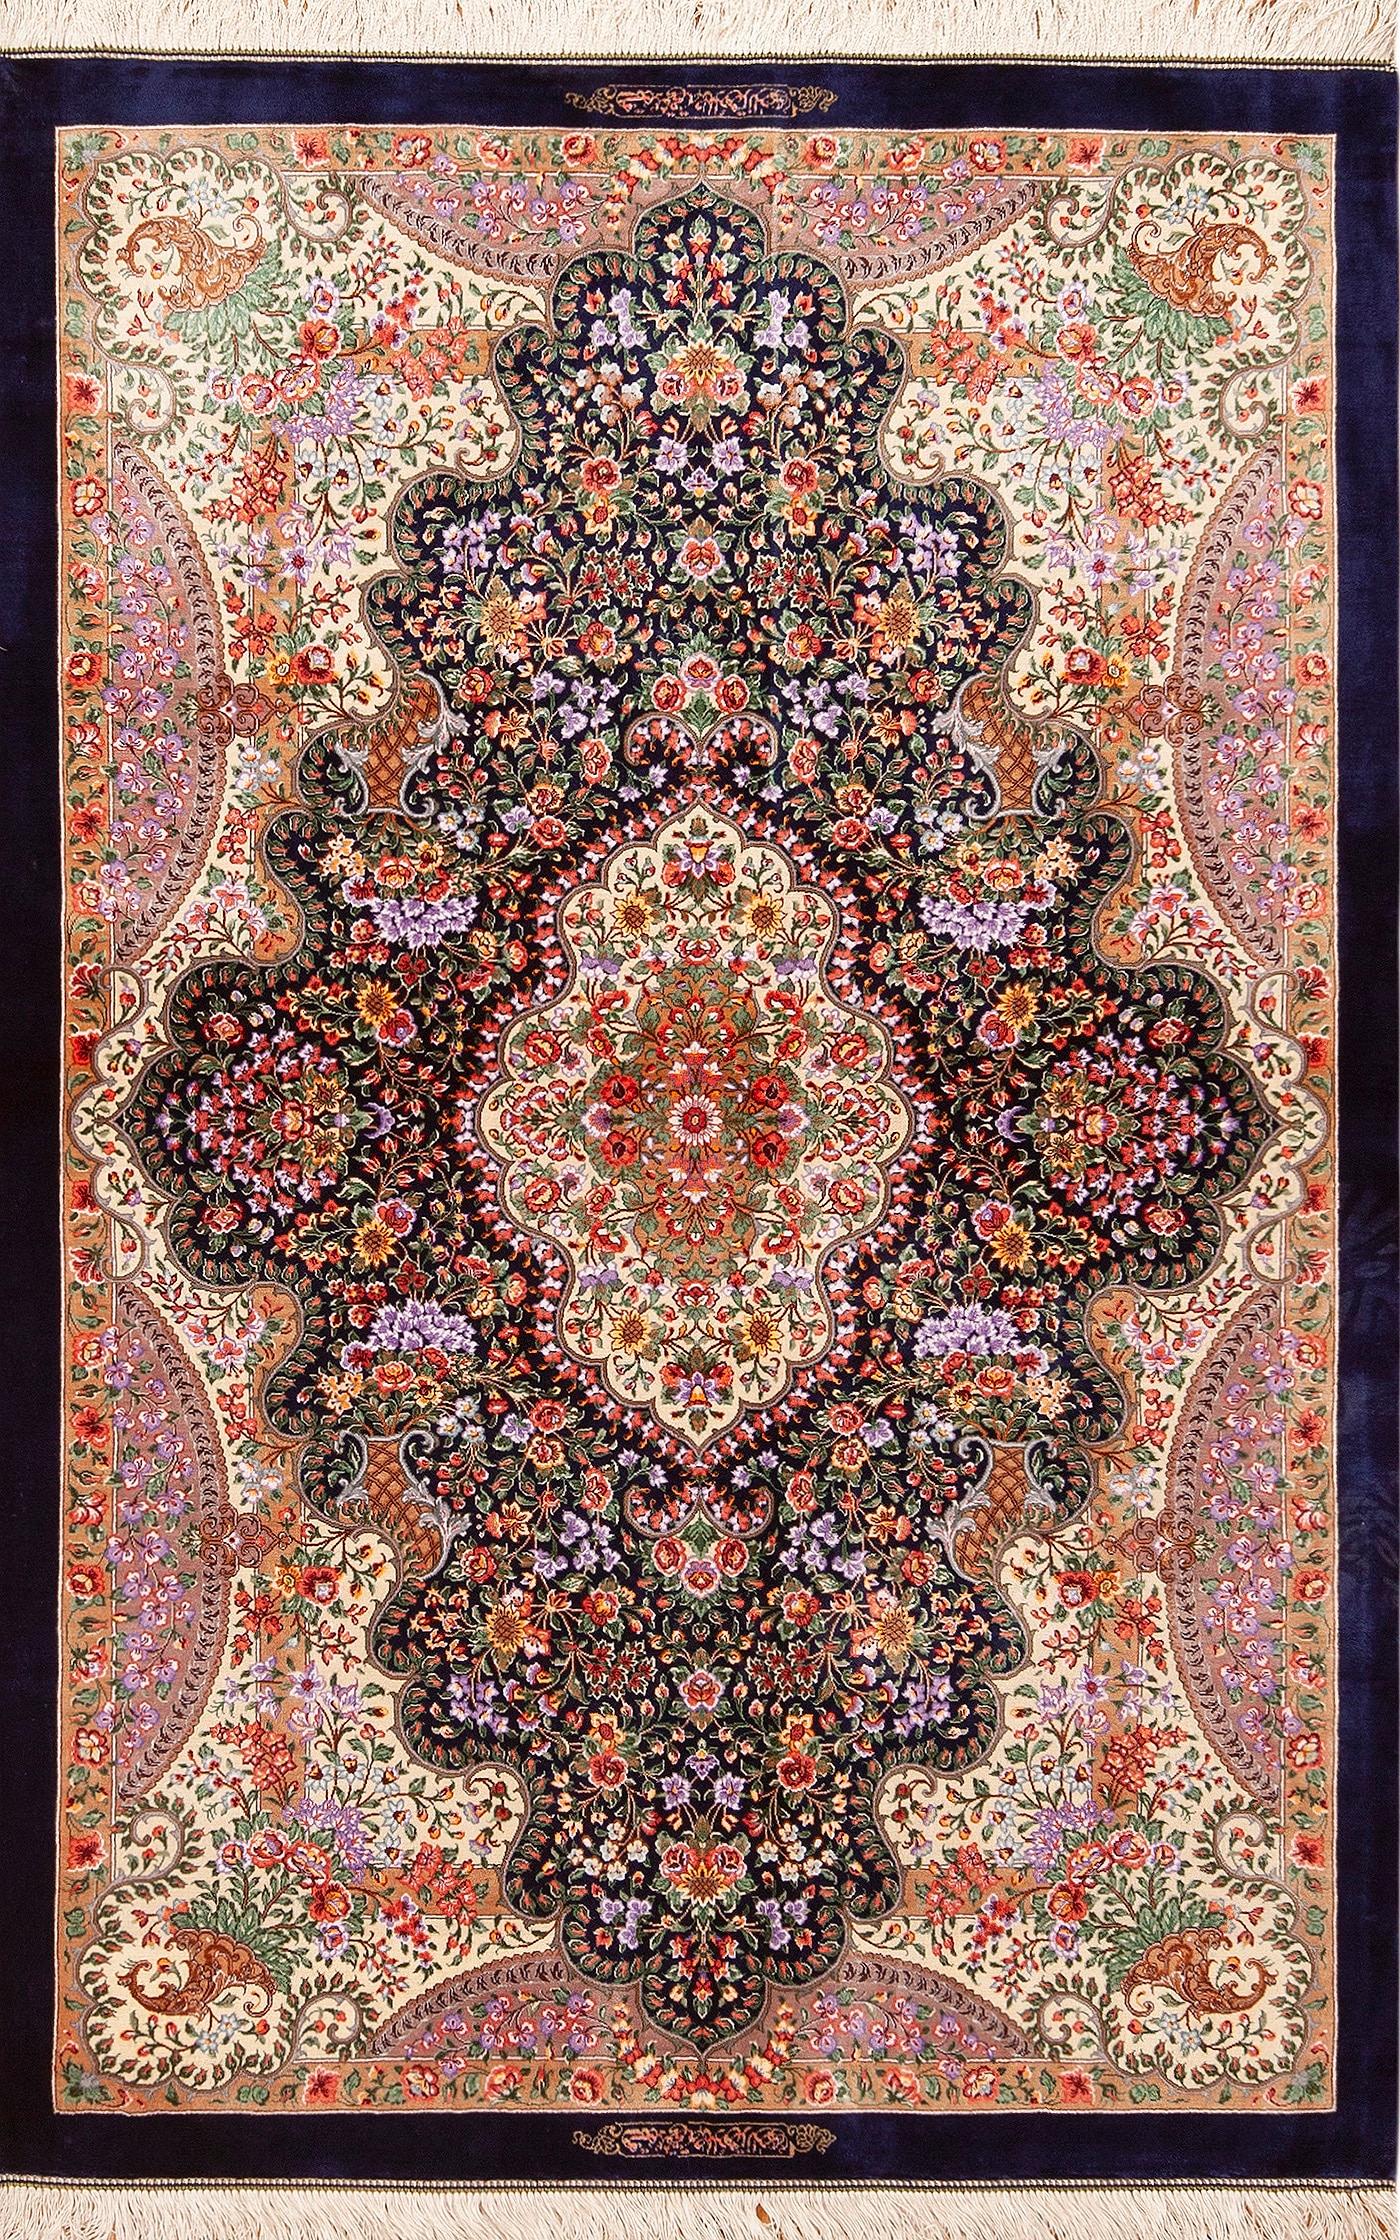 Luxurious Fine Small Size Vintage Floral Persian Silk Qum Rug, country of origin: Persian Rugs, Circa date: Vintage